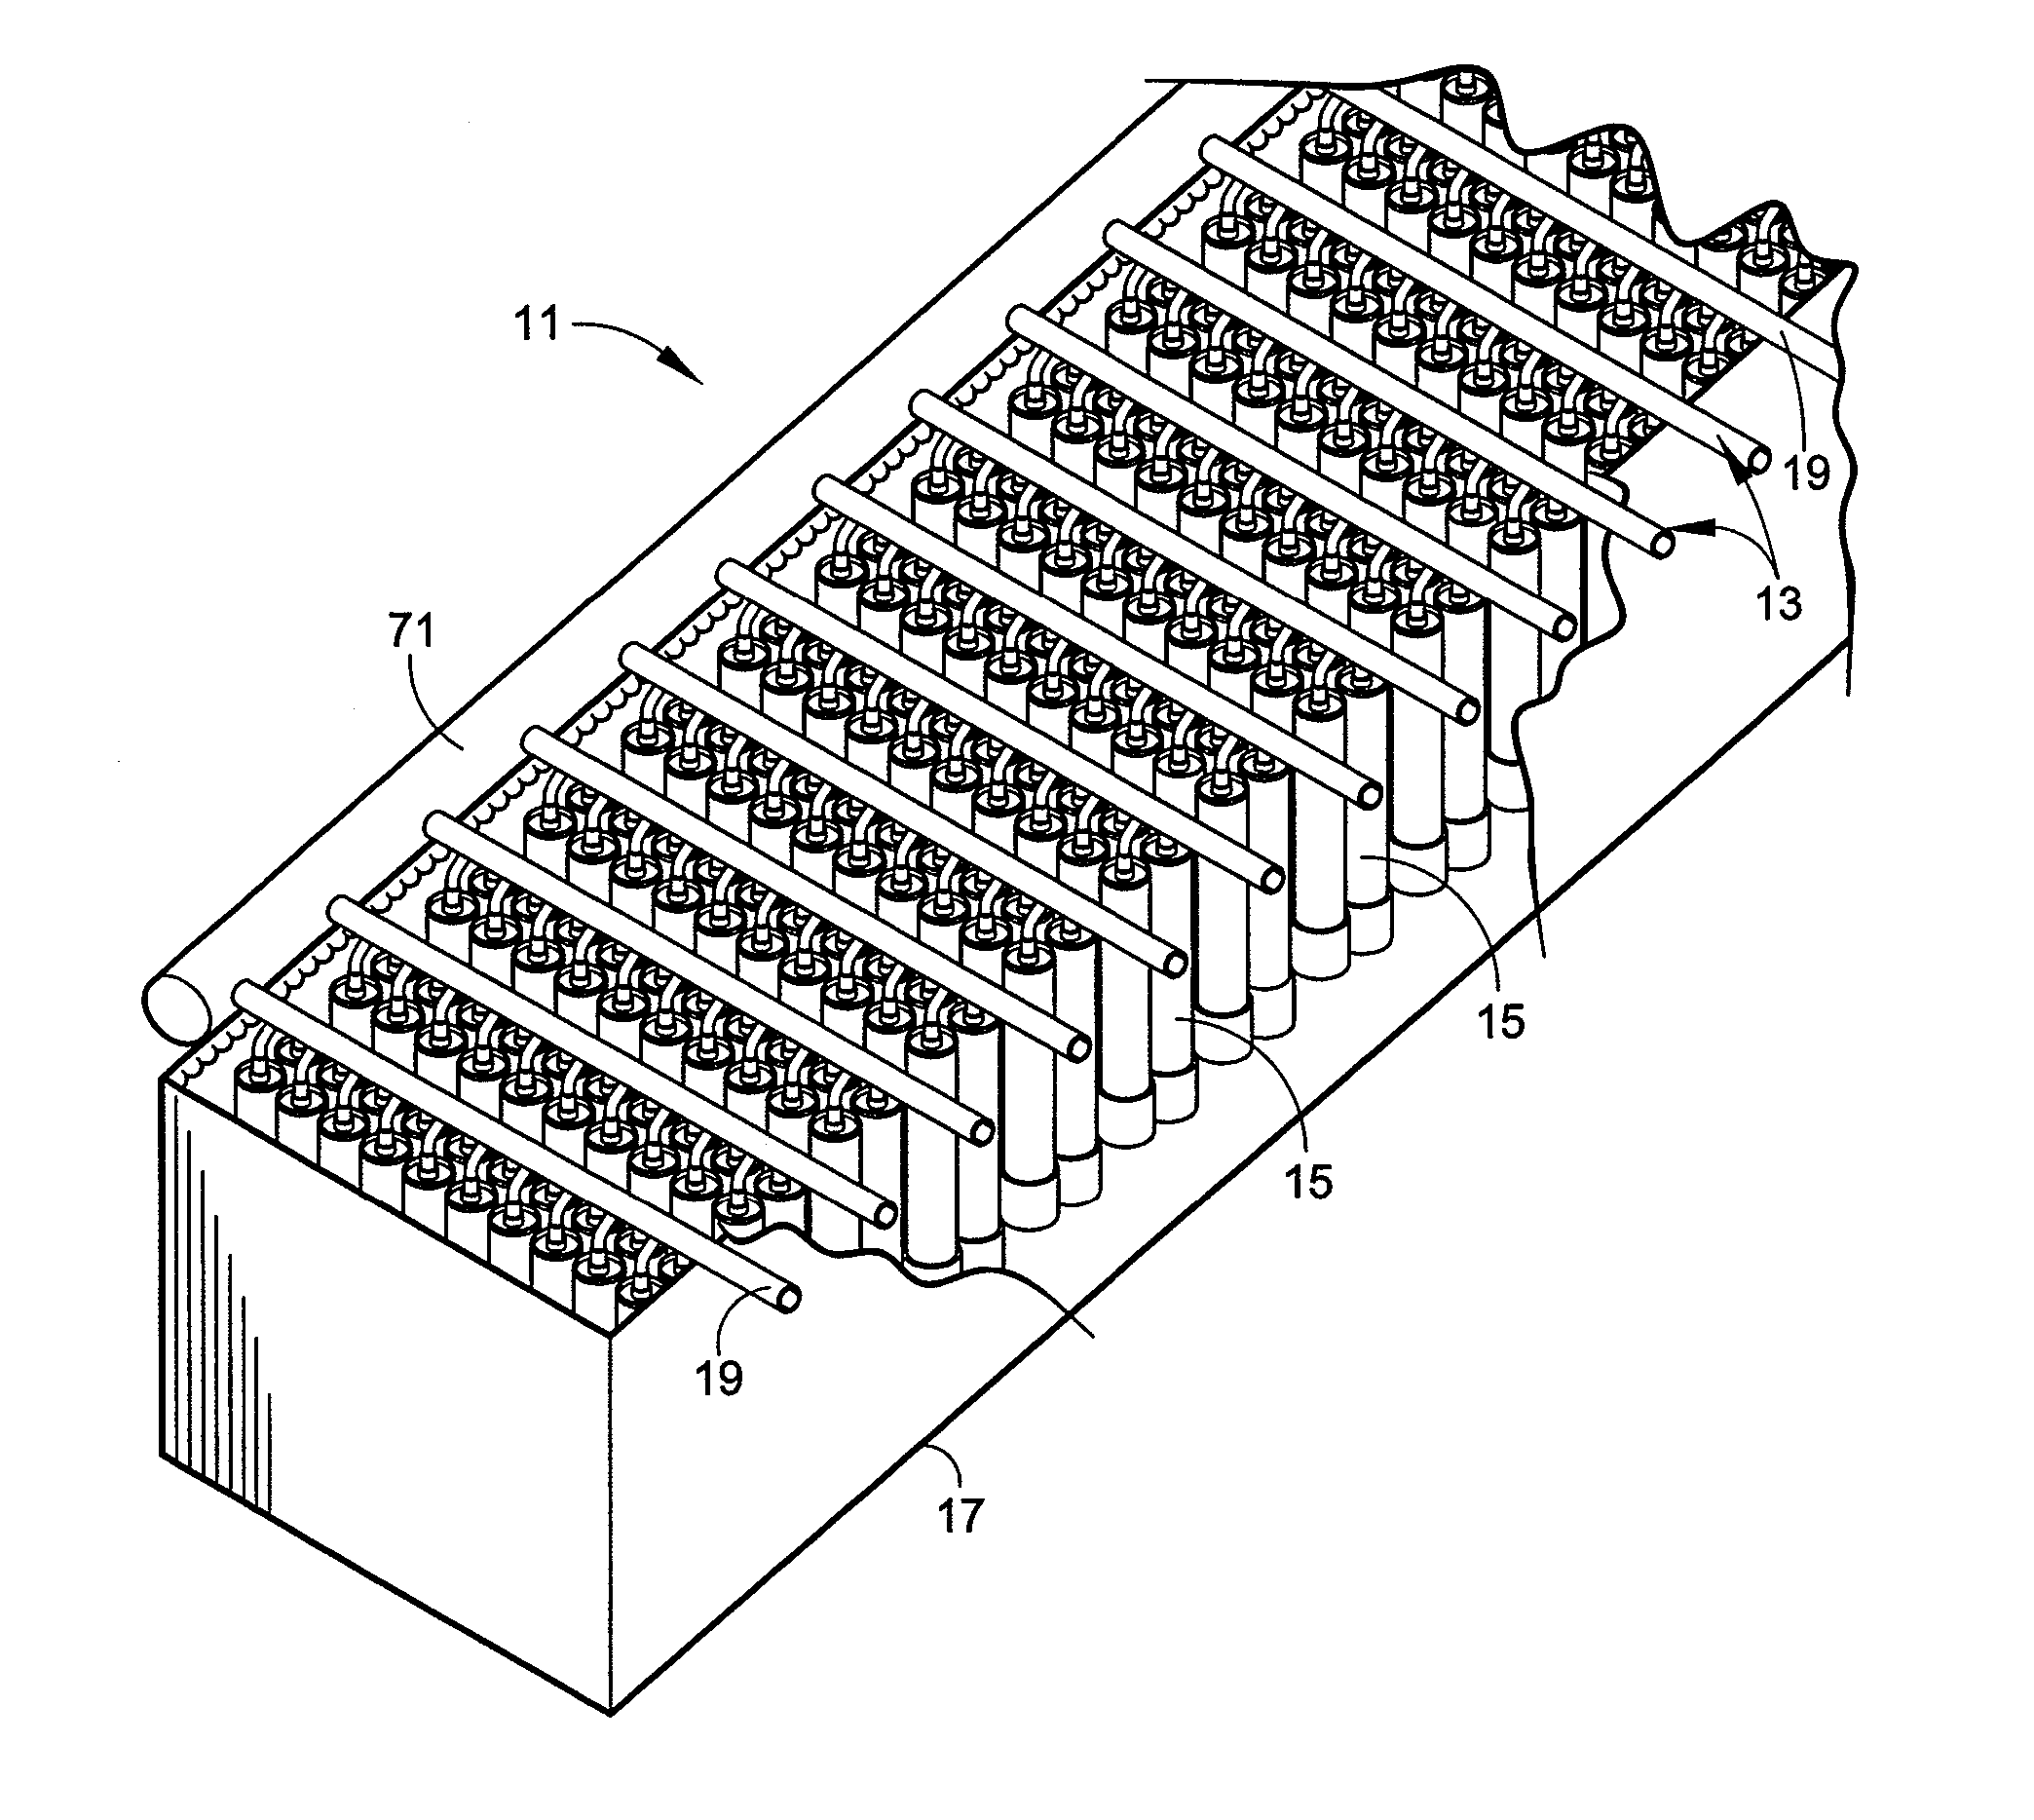 Network for supporting spiral wound membrane cartridges for submerged operation